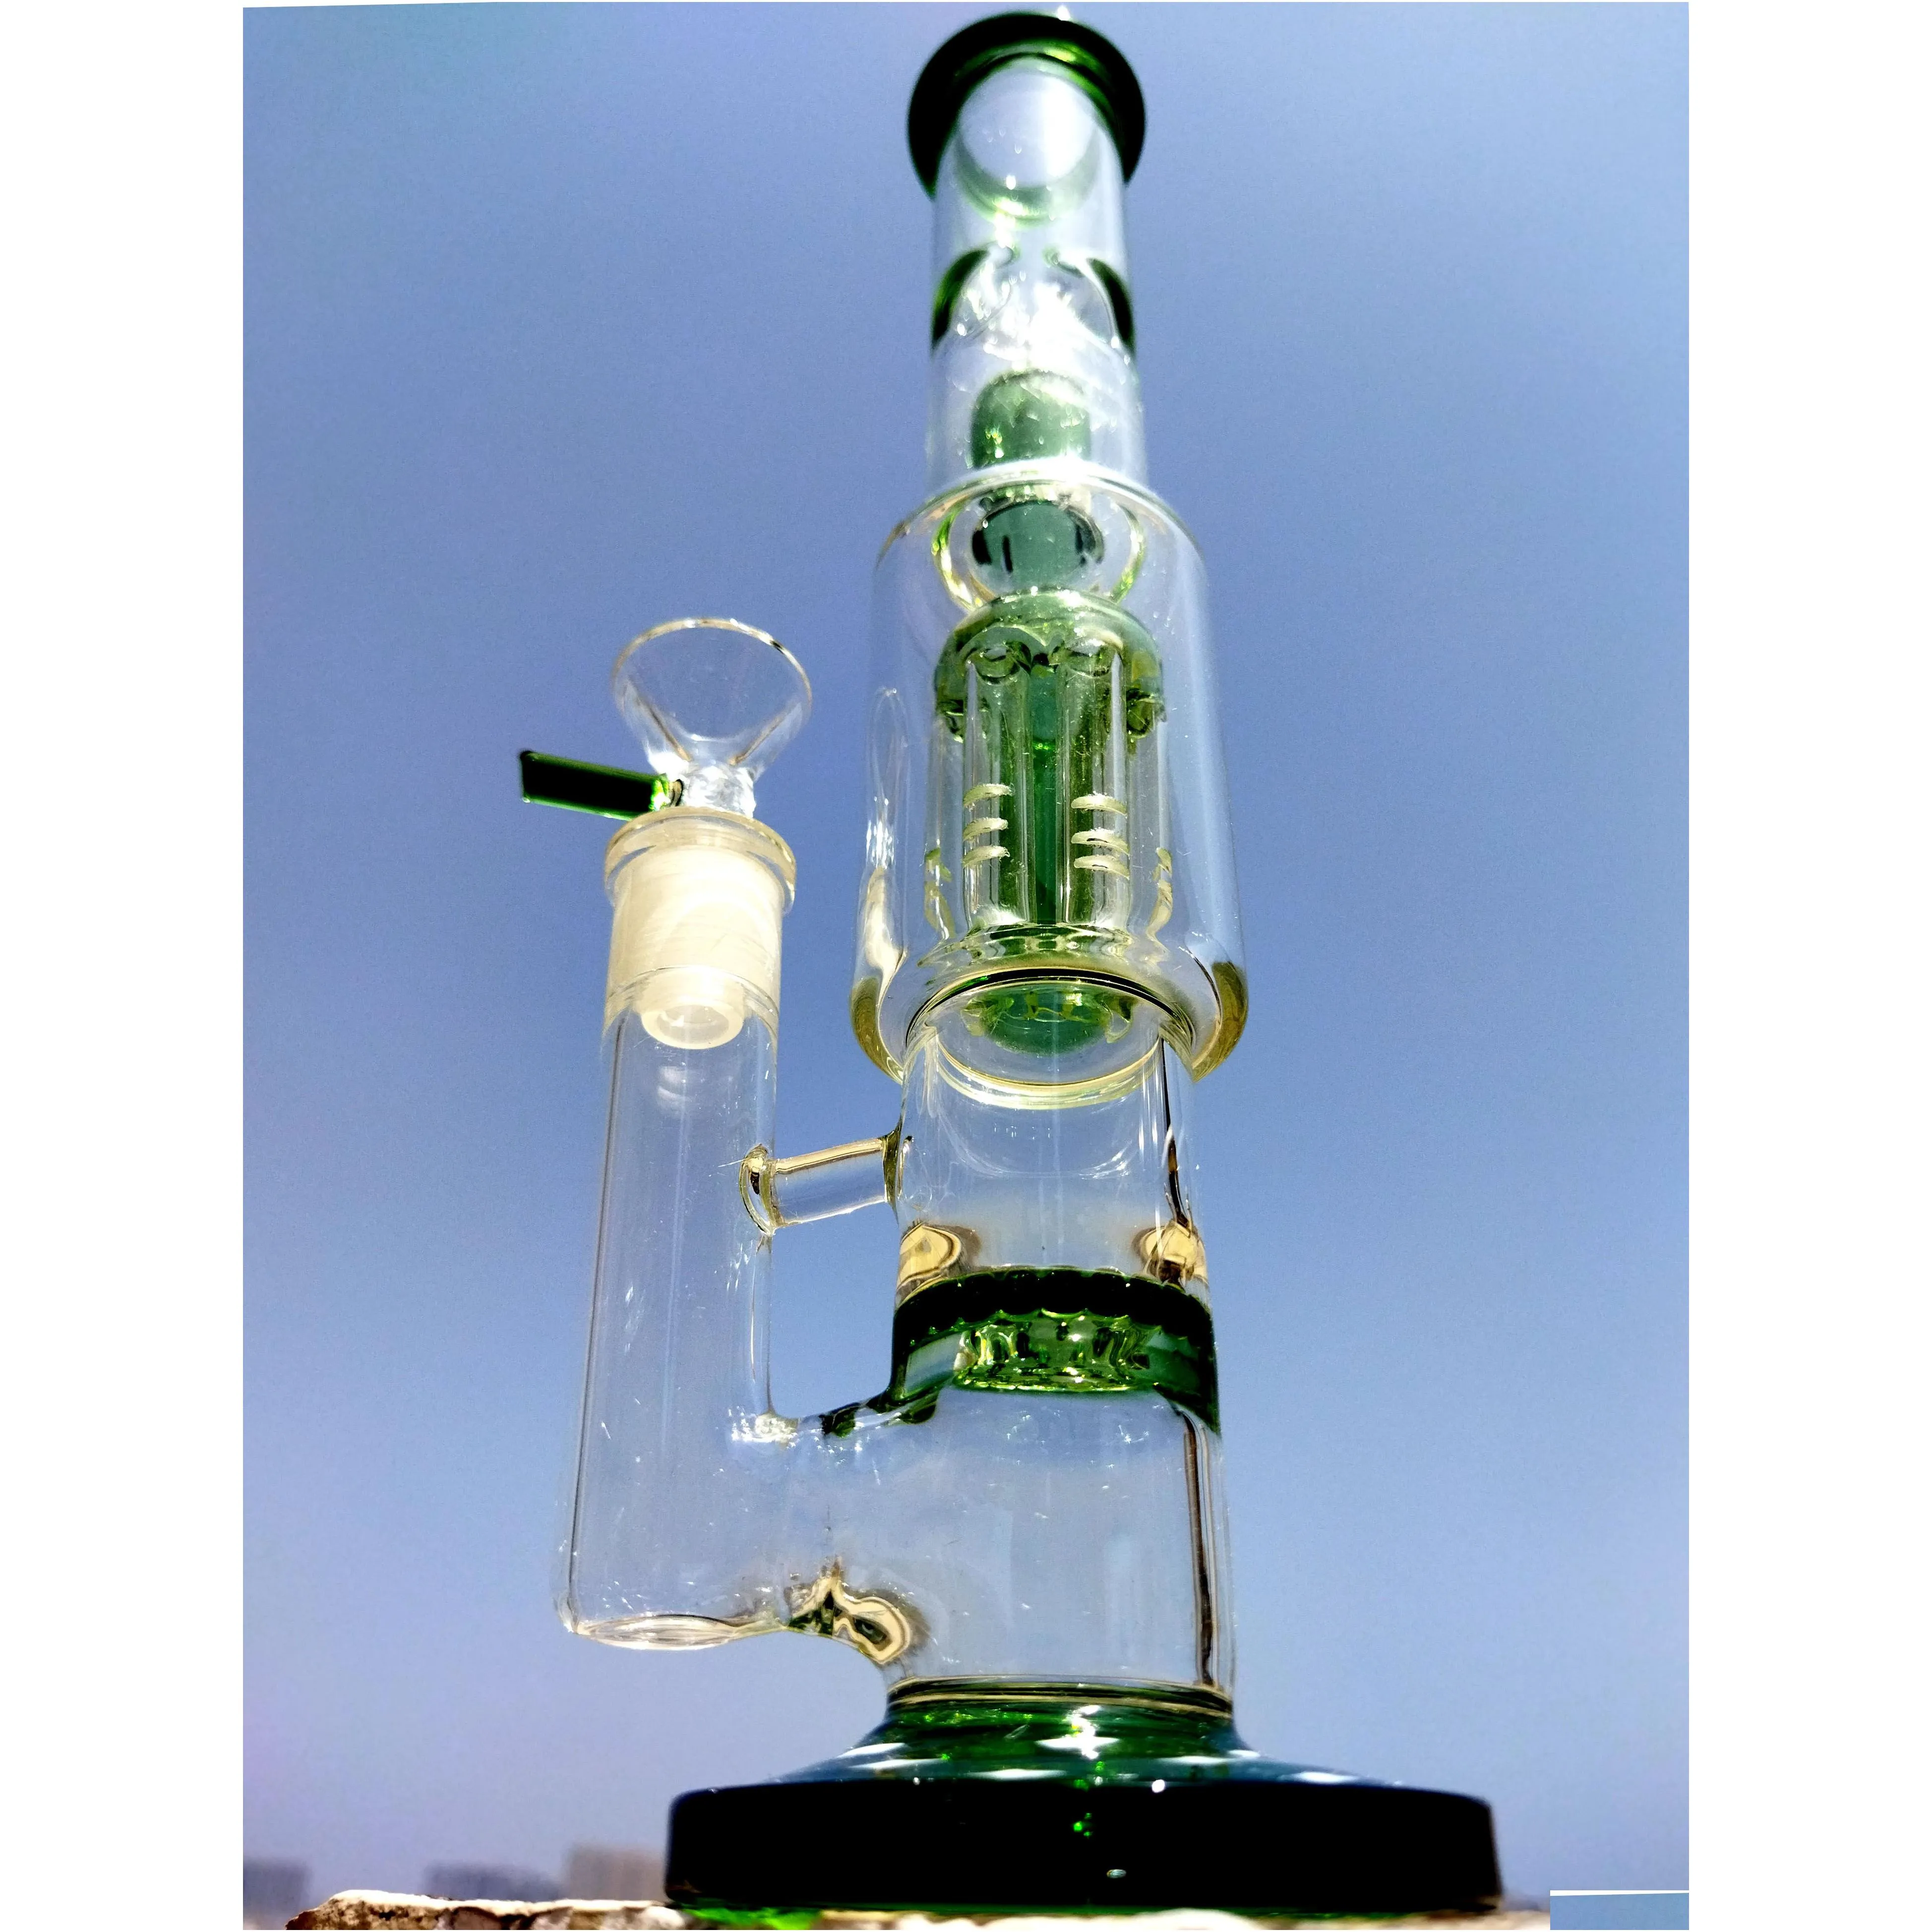 purple tube bong double honeycomb percs one matrix glass bong recycler dab rig smoking hookah with ice holder 14mm joint banger glass water